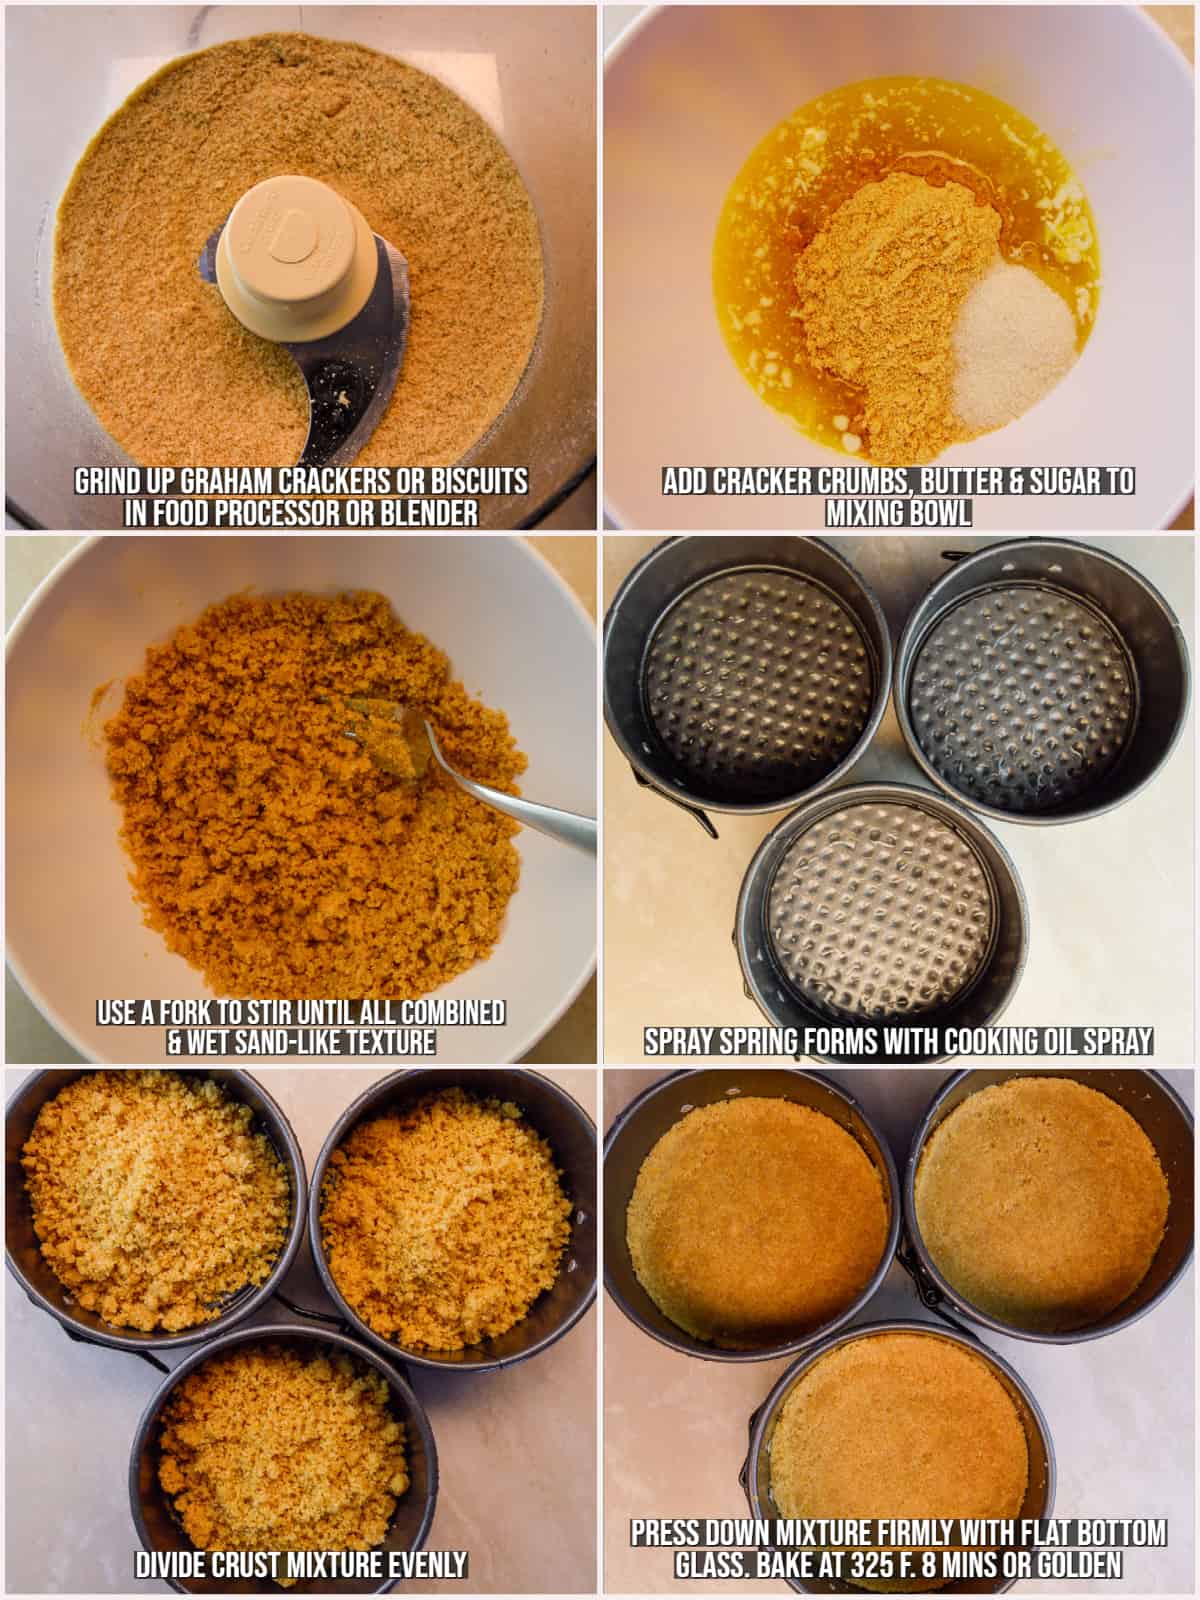 Steps shown to make graham cracker crust for mini Nutella cheesecakes in 4 inch springform pans.